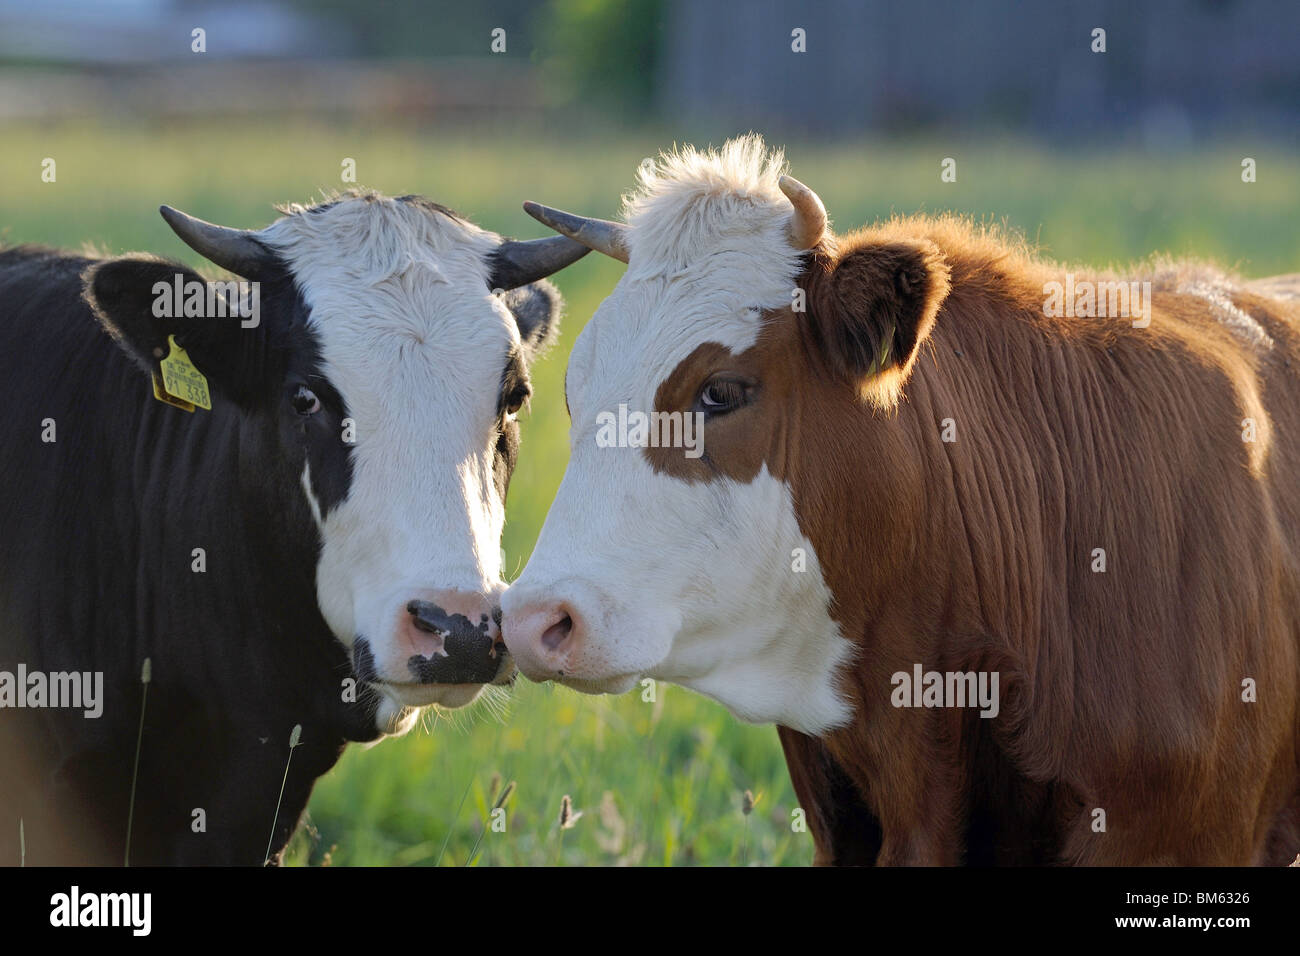 Domestic cattle, breed: Red Holstein (Bos primigenius, Bos taurus), two individuals on a pasture, portrait. Stock Photo